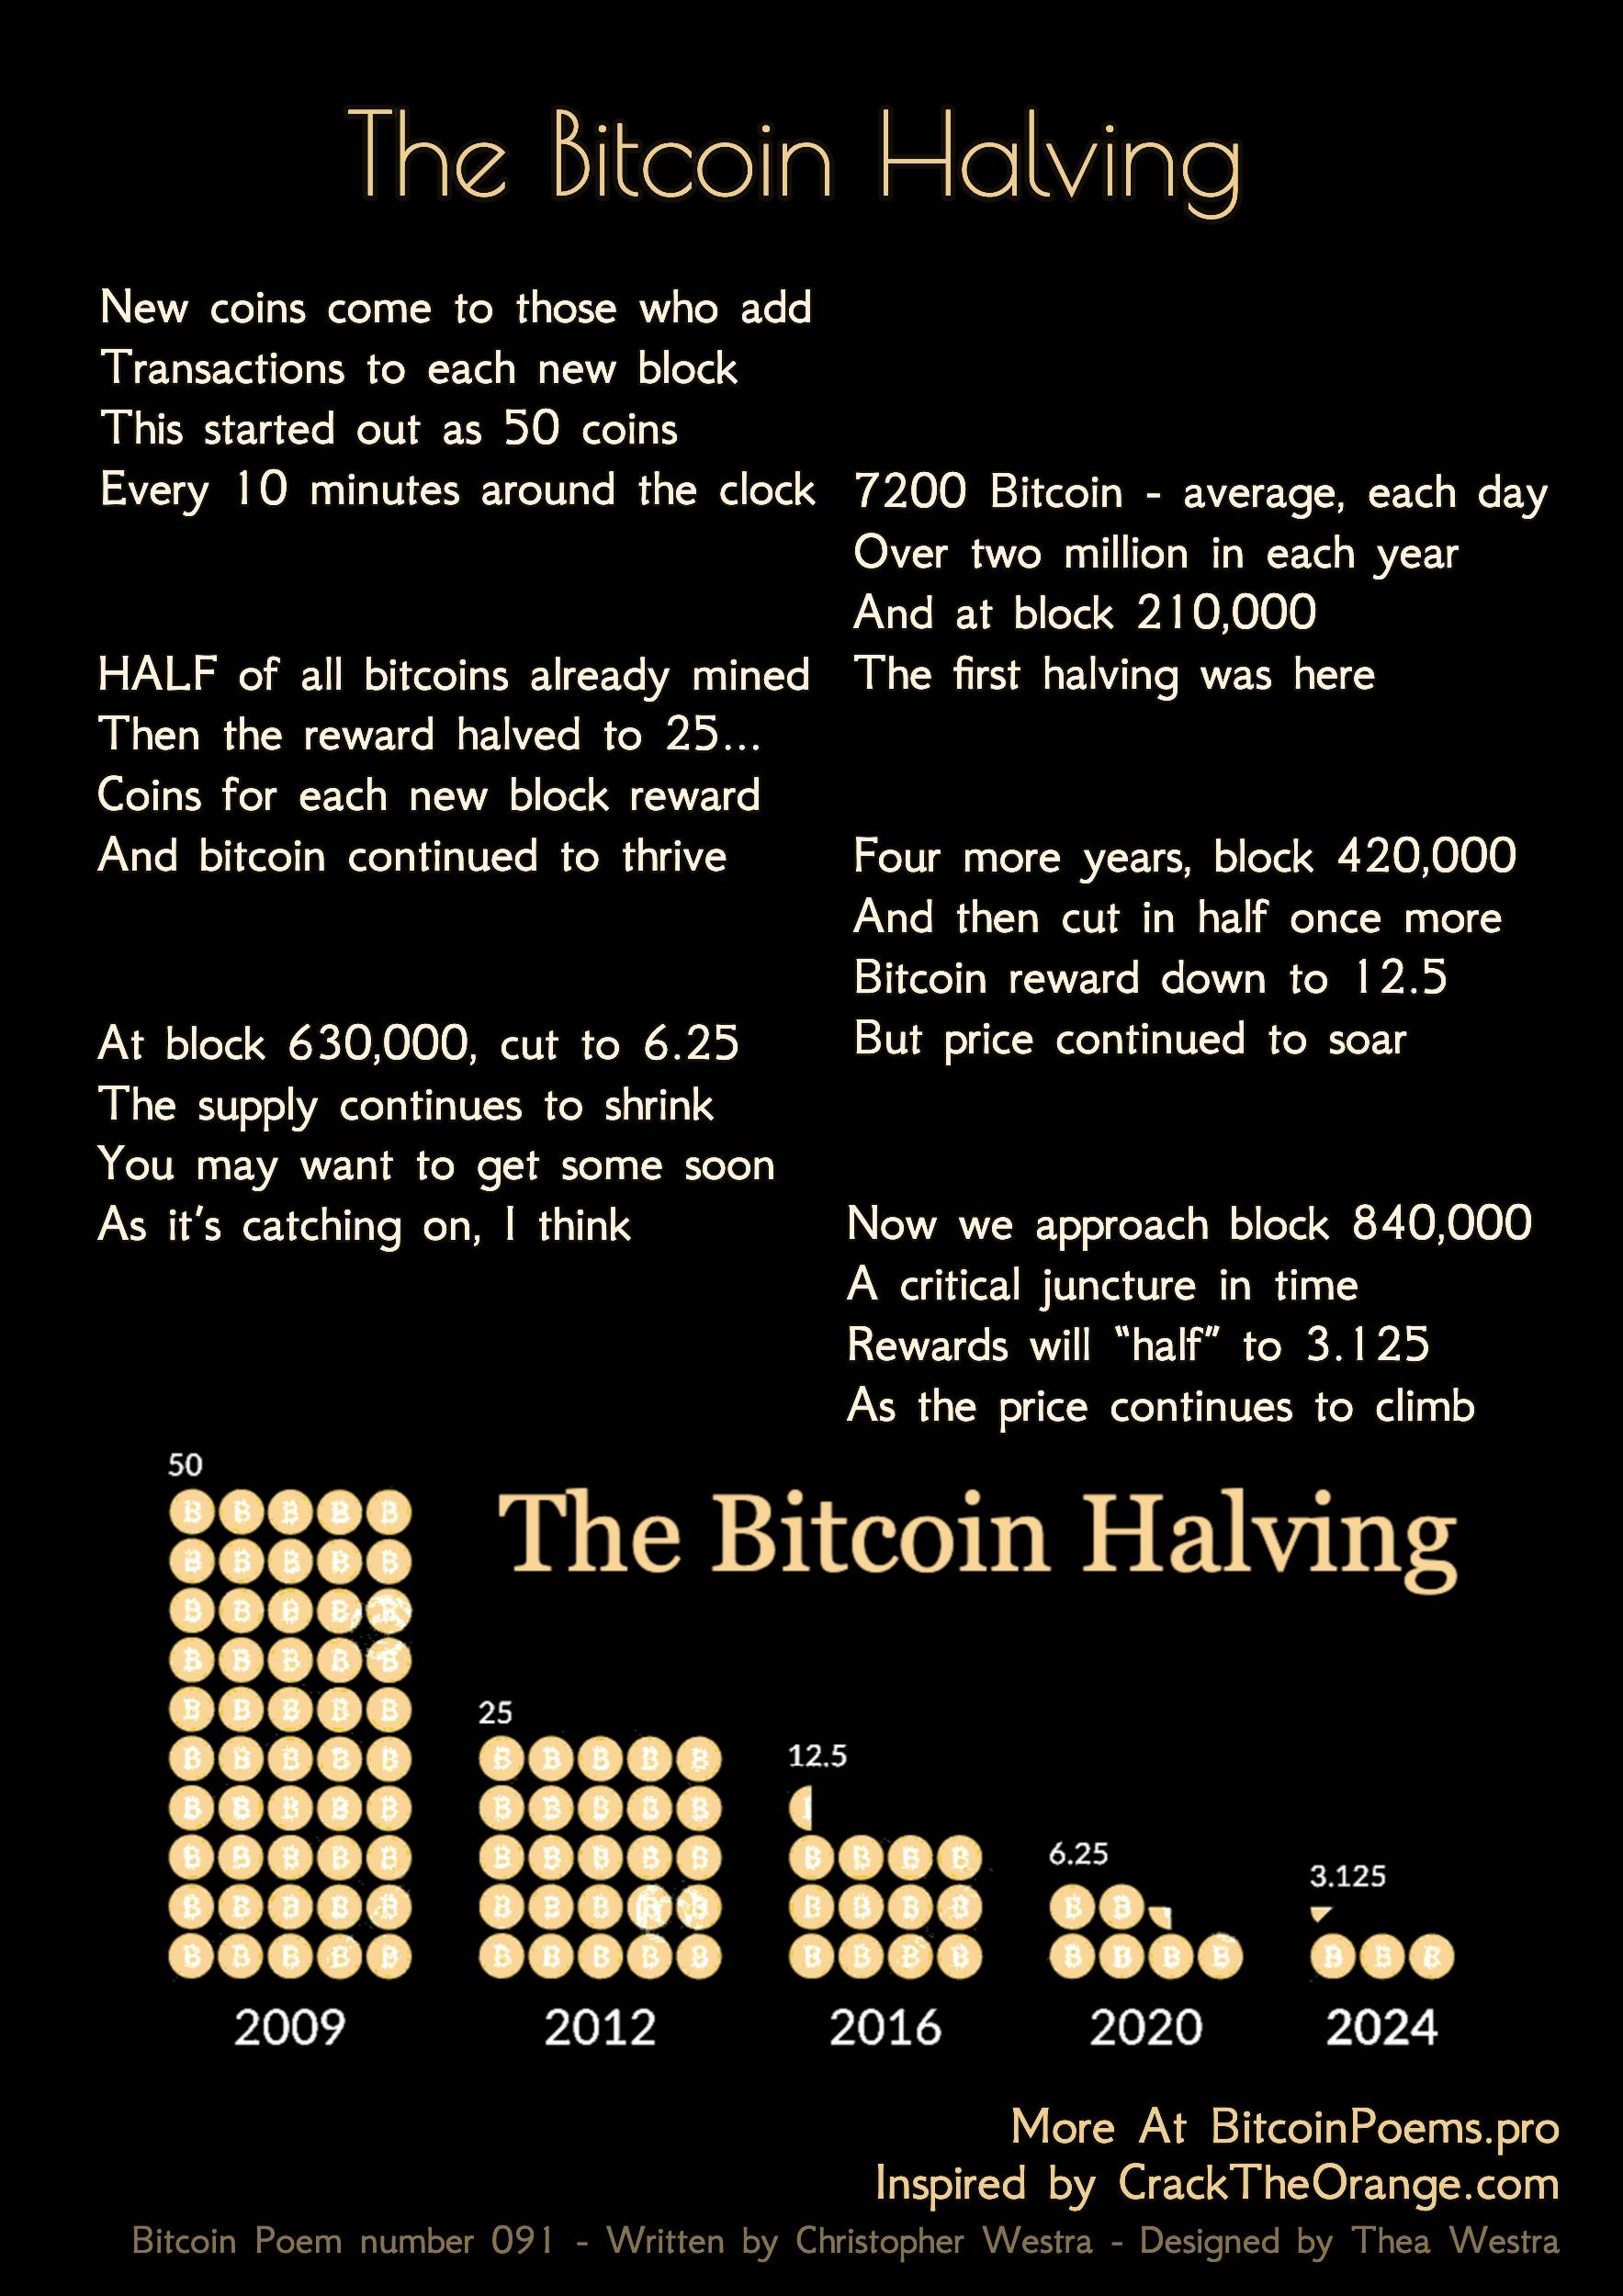 The Bitcoin Halving - Bitcoin Poem 091 by Christopher Westra